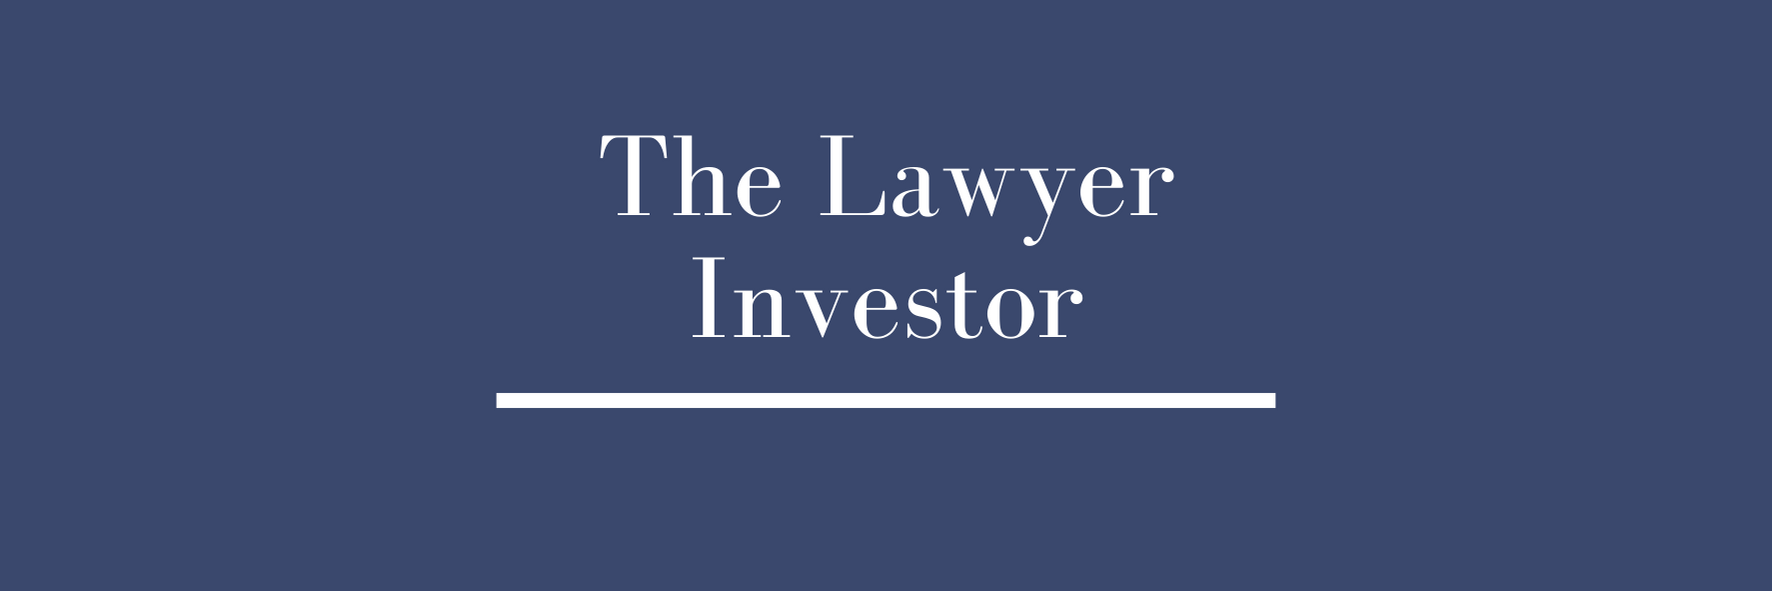 The Lawyer Investor